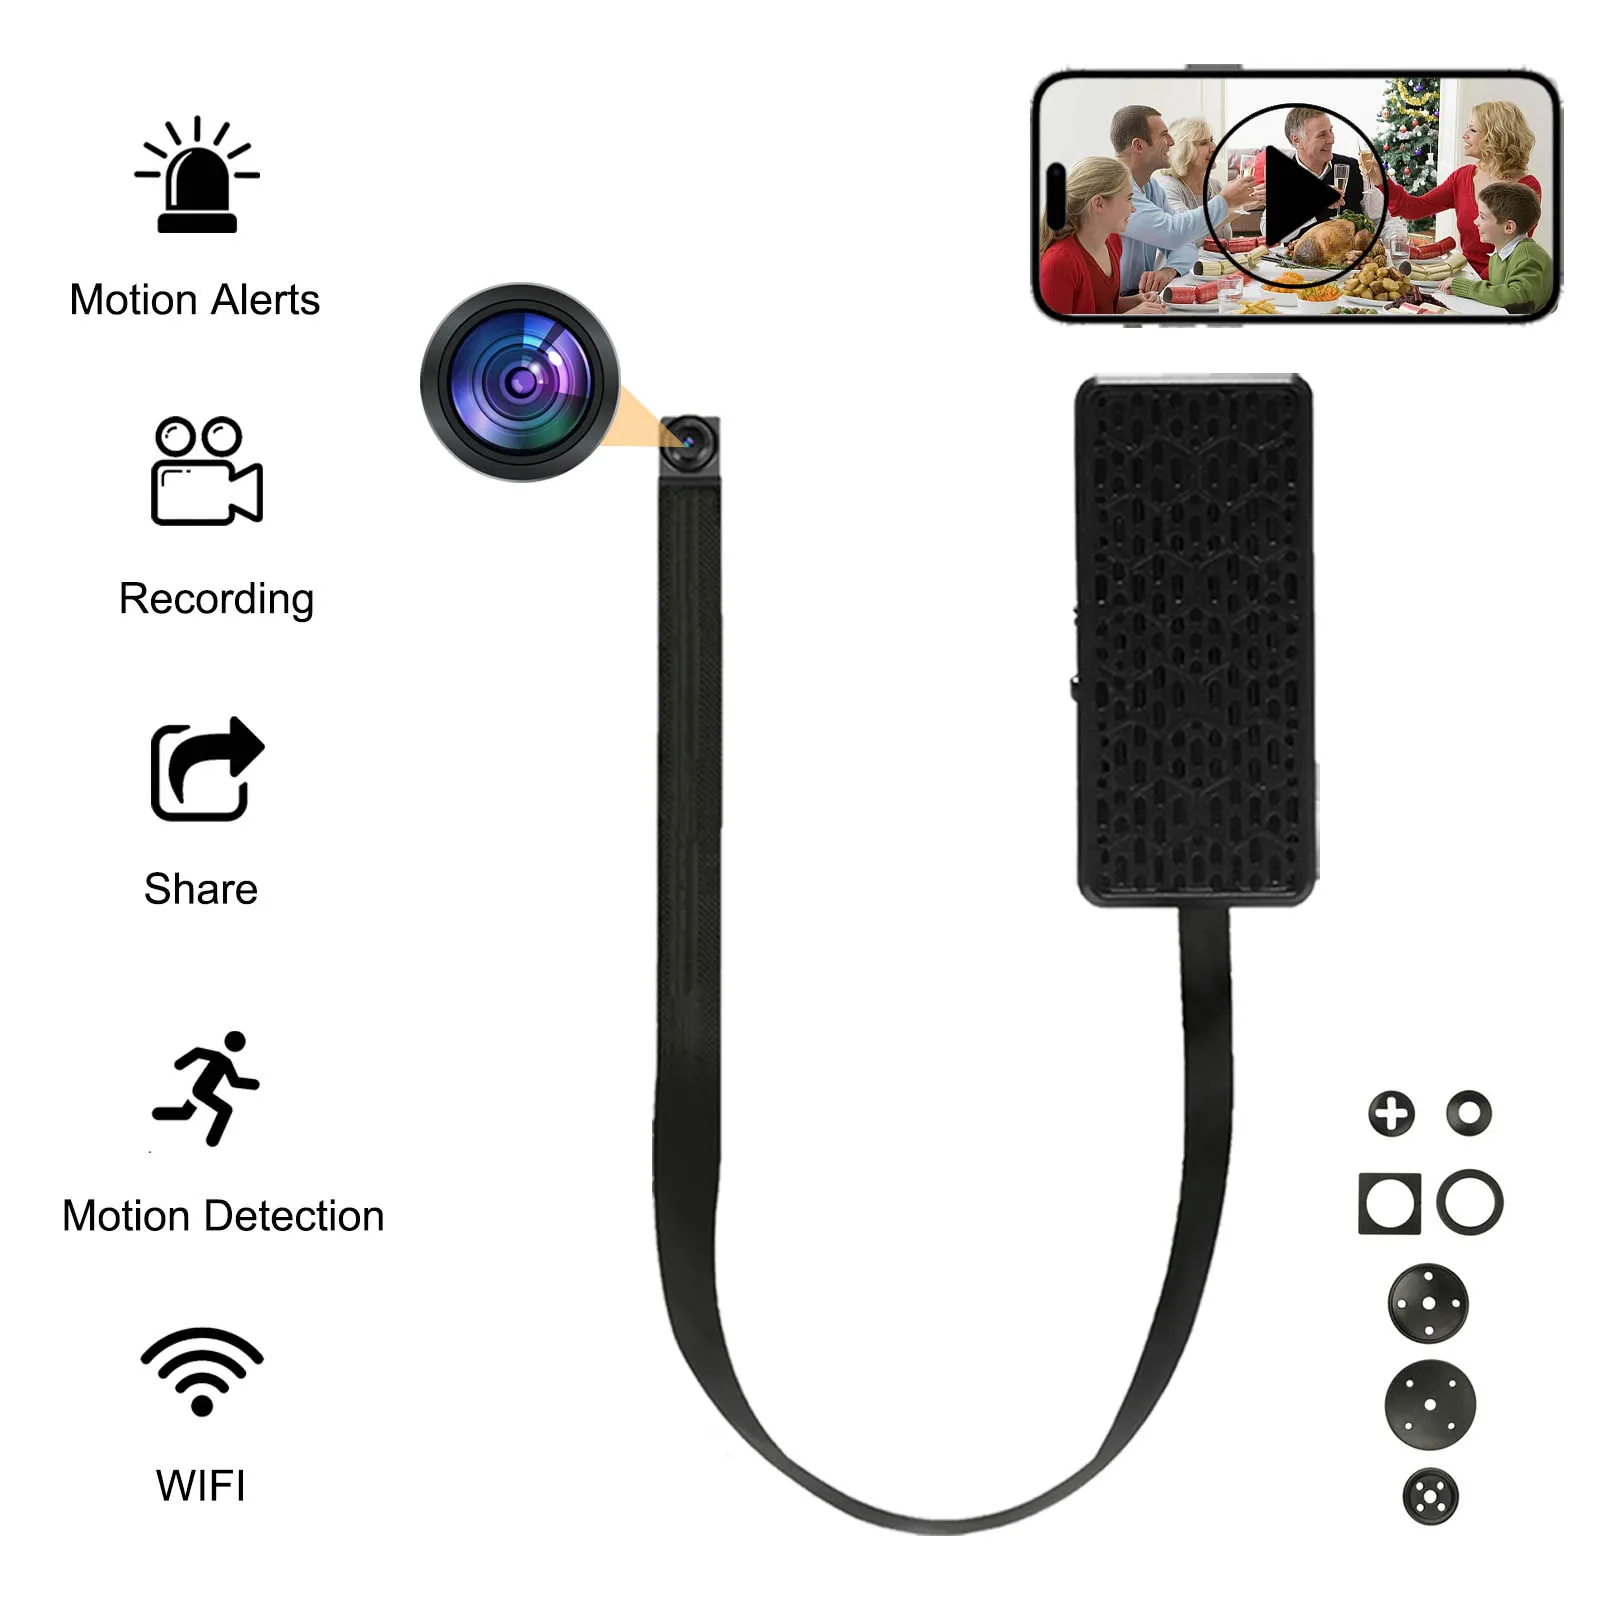 

DIY Mini Camera - WiFi Enabled, Full HD 1080P, Motion Detection Compact Size - Home Security and Surveillance Nanny Cam